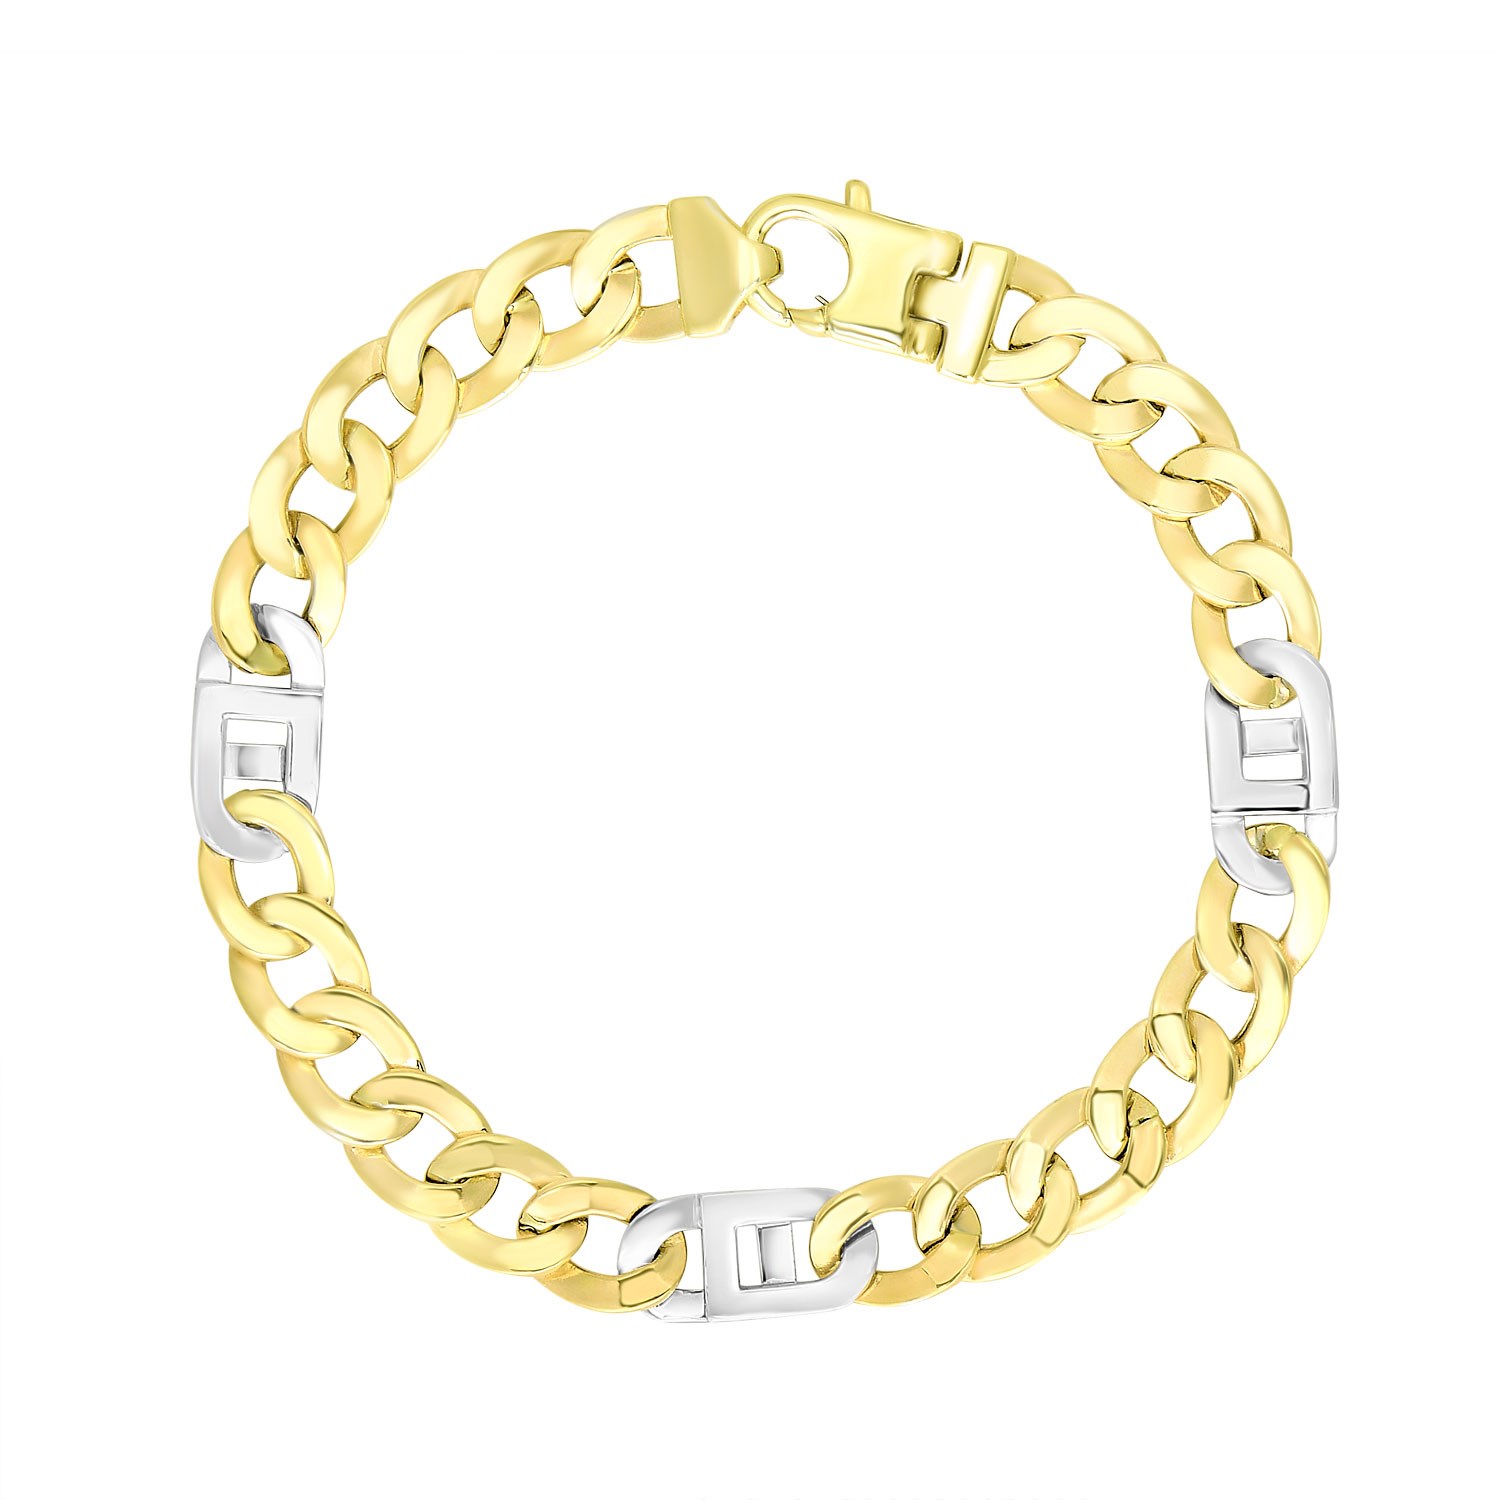 14k Two-Tone Gold Men's Bracelet with Curb Design Chain